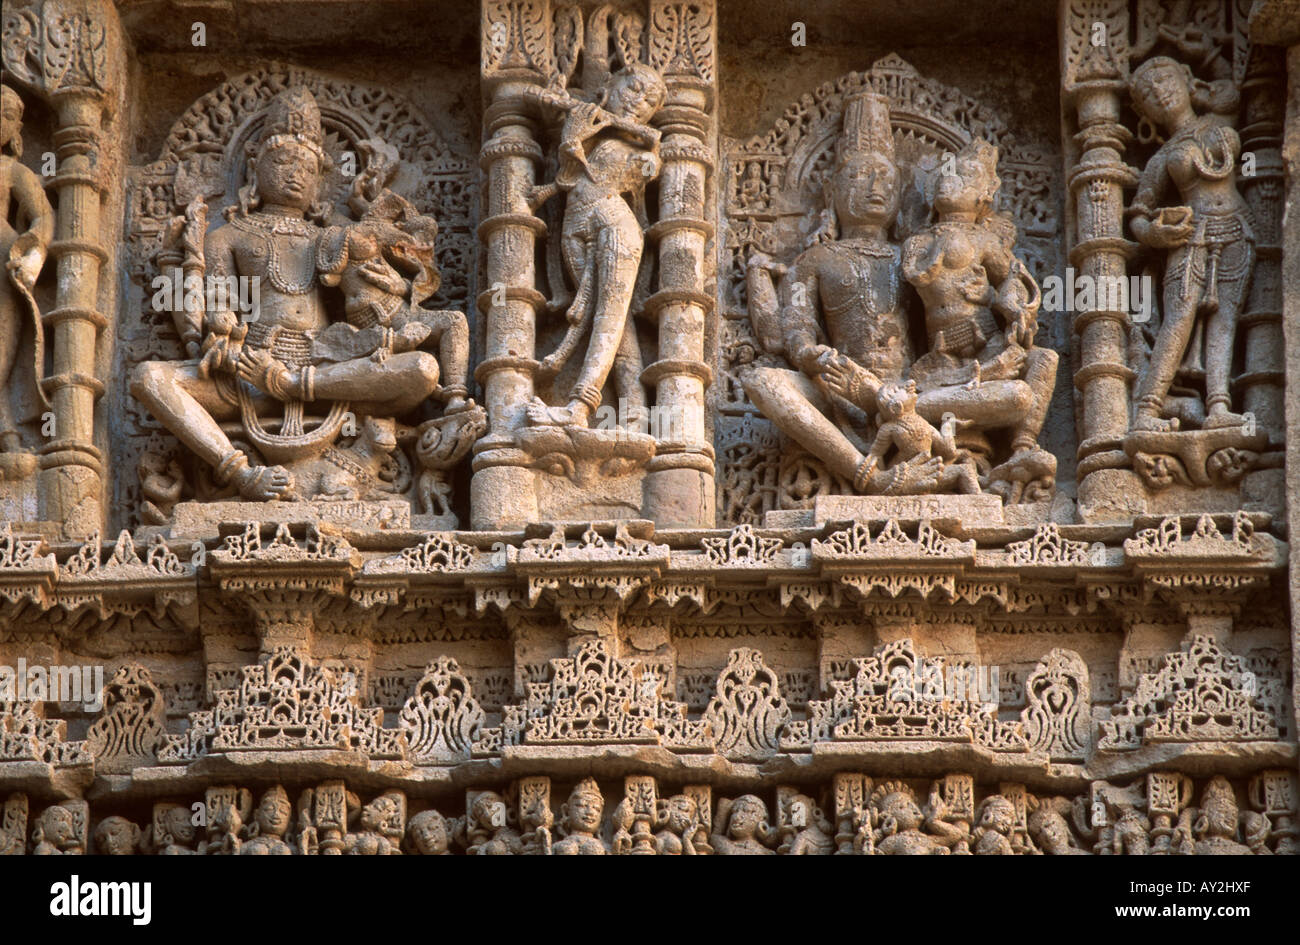 Carved stone Hindu figures, Patan step well called the Rani ki vav, Gujarat, India. Built about 1050 A.D. Stock Photo